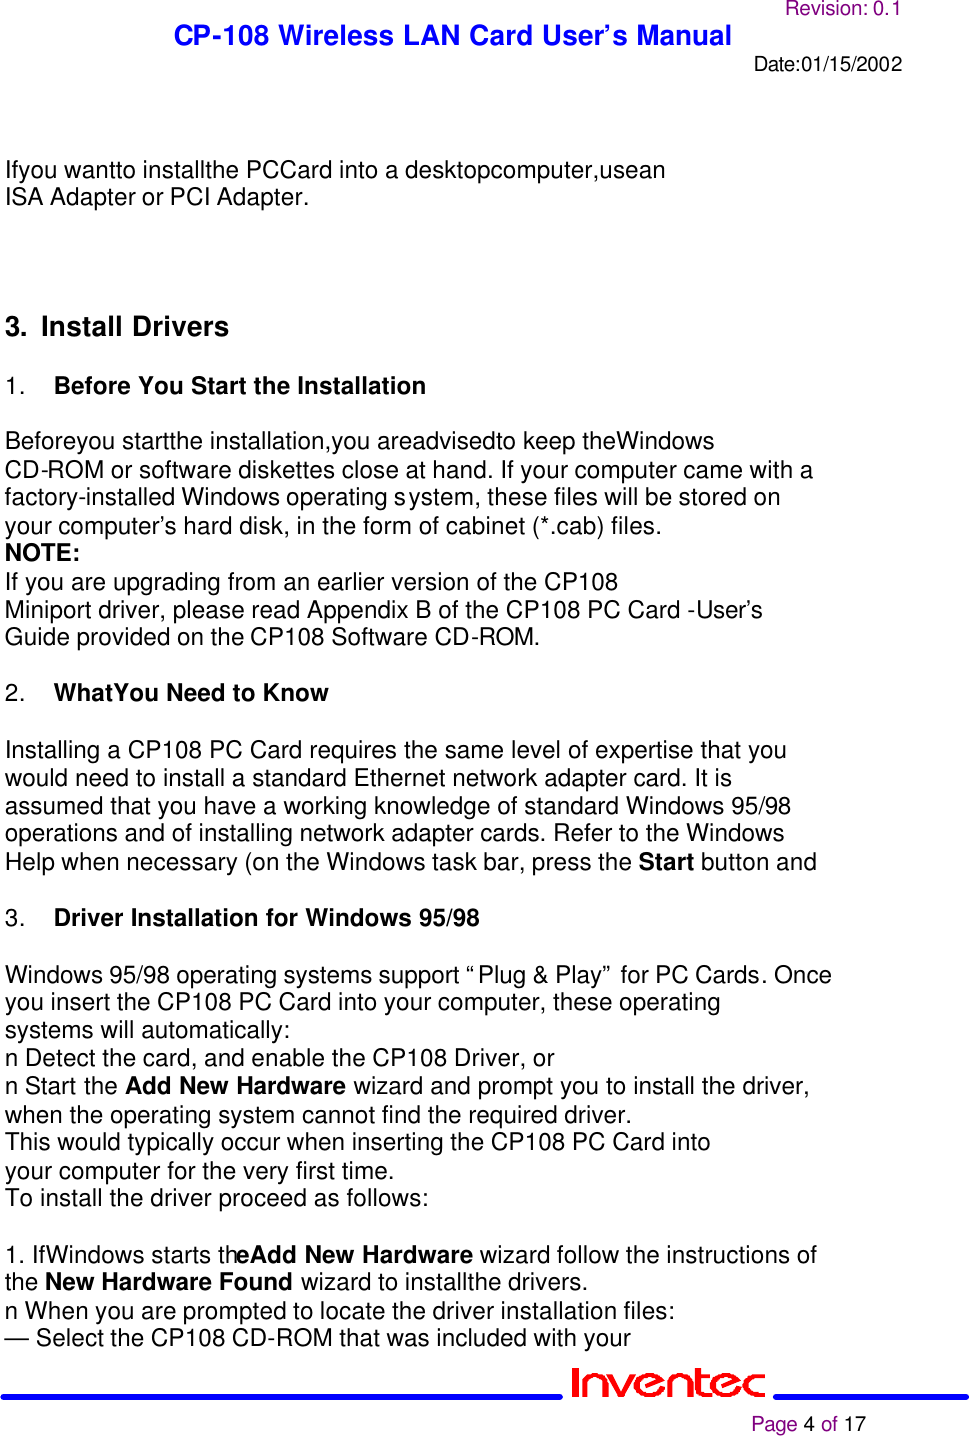 Revision: 0.1 CP-108 Wireless LAN Card User’s Manual Date:01/15/2002                                                                                                                                                             Page 4 of 17    Ifyou wantto installthe PCCard into a desktopcomputer,usean ISA Adapter or PCI Adapter.    3. Install Drivers  1. Before You Start the Installation 2  Beforeyou startthe installation,you areadvisedto keep theWindows CD-ROM or software diskettes close at hand. If your computer came with a factory-installed Windows operating system, these files will be stored on your computer’s hard disk, in the form of cabinet (*.cab) files. NOTE: If you are upgrading from an earlier version of the CP108 Miniport driver, please read Appendix B of the CP108 PC Card -User’s  Guide provided on the CP108 Software CD-ROM.  2. WhatYou Need to Know 2  Installing a CP108 PC Card requires the same level of expertise that you would need to install a standard Ethernet network adapter card. It is assumed that you have a working knowledge of standard Windows 95/98 operations and of installing network adapter cards. Refer to the Windows Help when necessary (on the Windows task bar, press the Start button and  3. Driver Installation for Windows 95/98  Windows 95/98 operating systems support “Plug &amp; Play” for PC Cards. Once you insert the CP108 PC Card into your computer, these operating systems will automatically: n Detect the card, and enable the CP108 Driver, or n Start the Add New Hardware wizard and prompt you to install the driver, when the operating system cannot find the required driver. This would typically occur when inserting the CP108 PC Card into your computer for the very first time. To install the driver proceed as follows:  1. IfWindows starts theAdd New Hardware wizard follow the instructions of the New Hardware Found wizard to installthe drivers. n When you are prompted to locate the driver installation files: — Select the CP108 CD-ROM that was included with your 